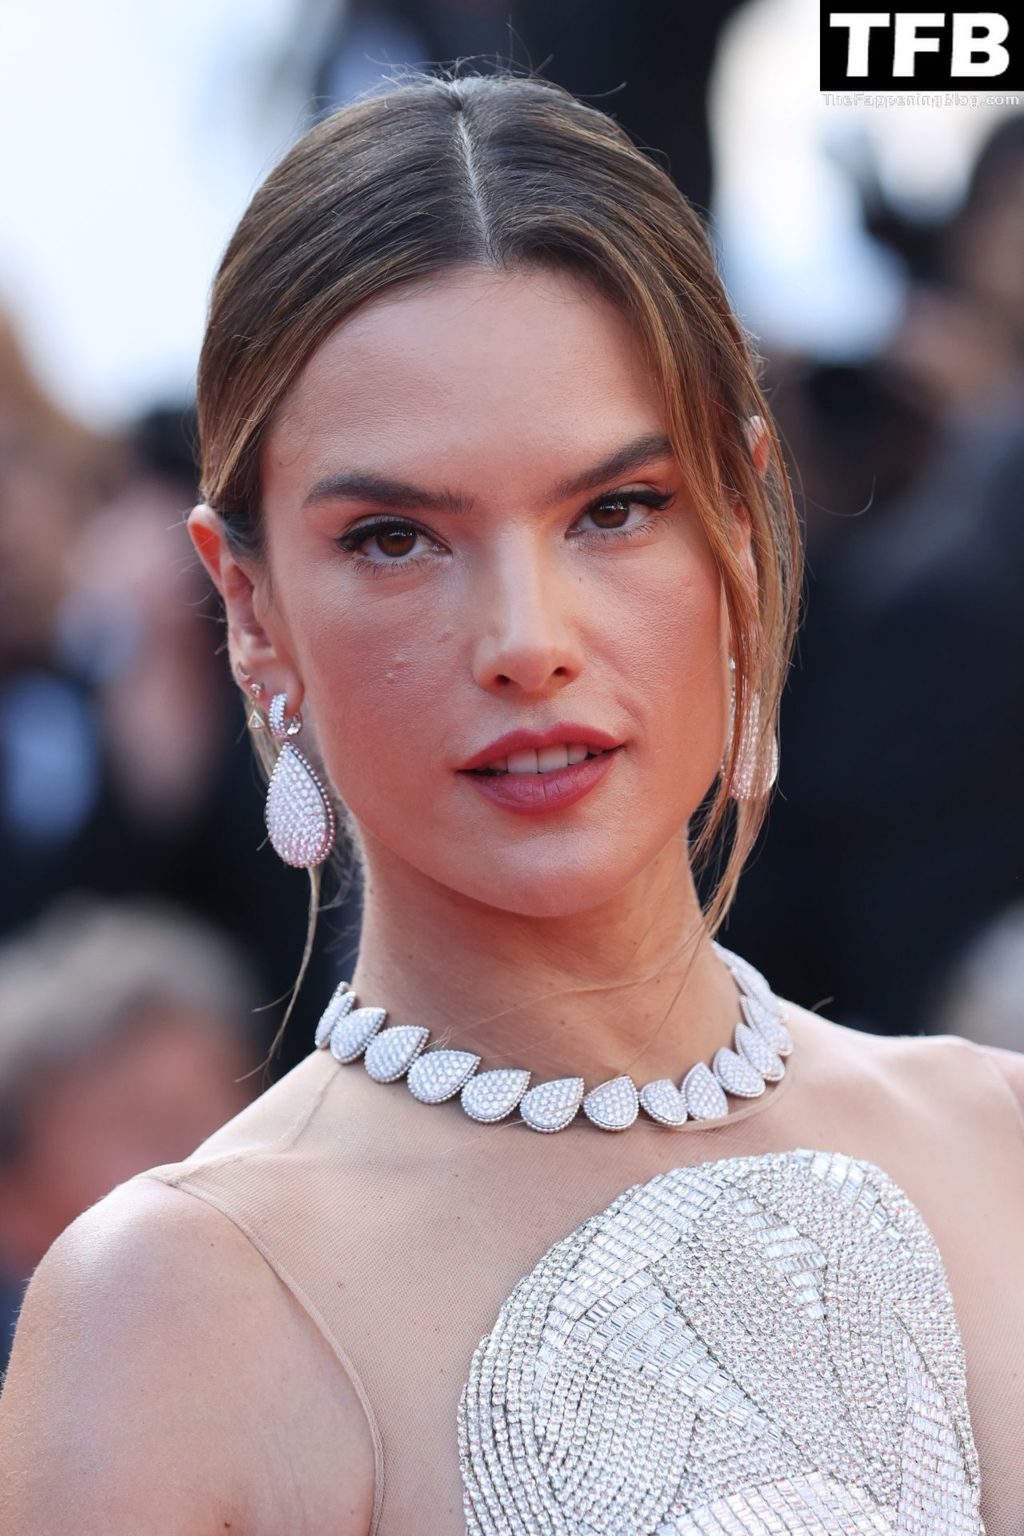 Alessandra Ambrosio Sexy The Fappening Blog 31 1 1024x1536 - Alessandra Ambrosio Poses Braless as She Attends the Screening of “Armageddon Time” During the 75th Annual Cannes Film Festival (150 Photos)